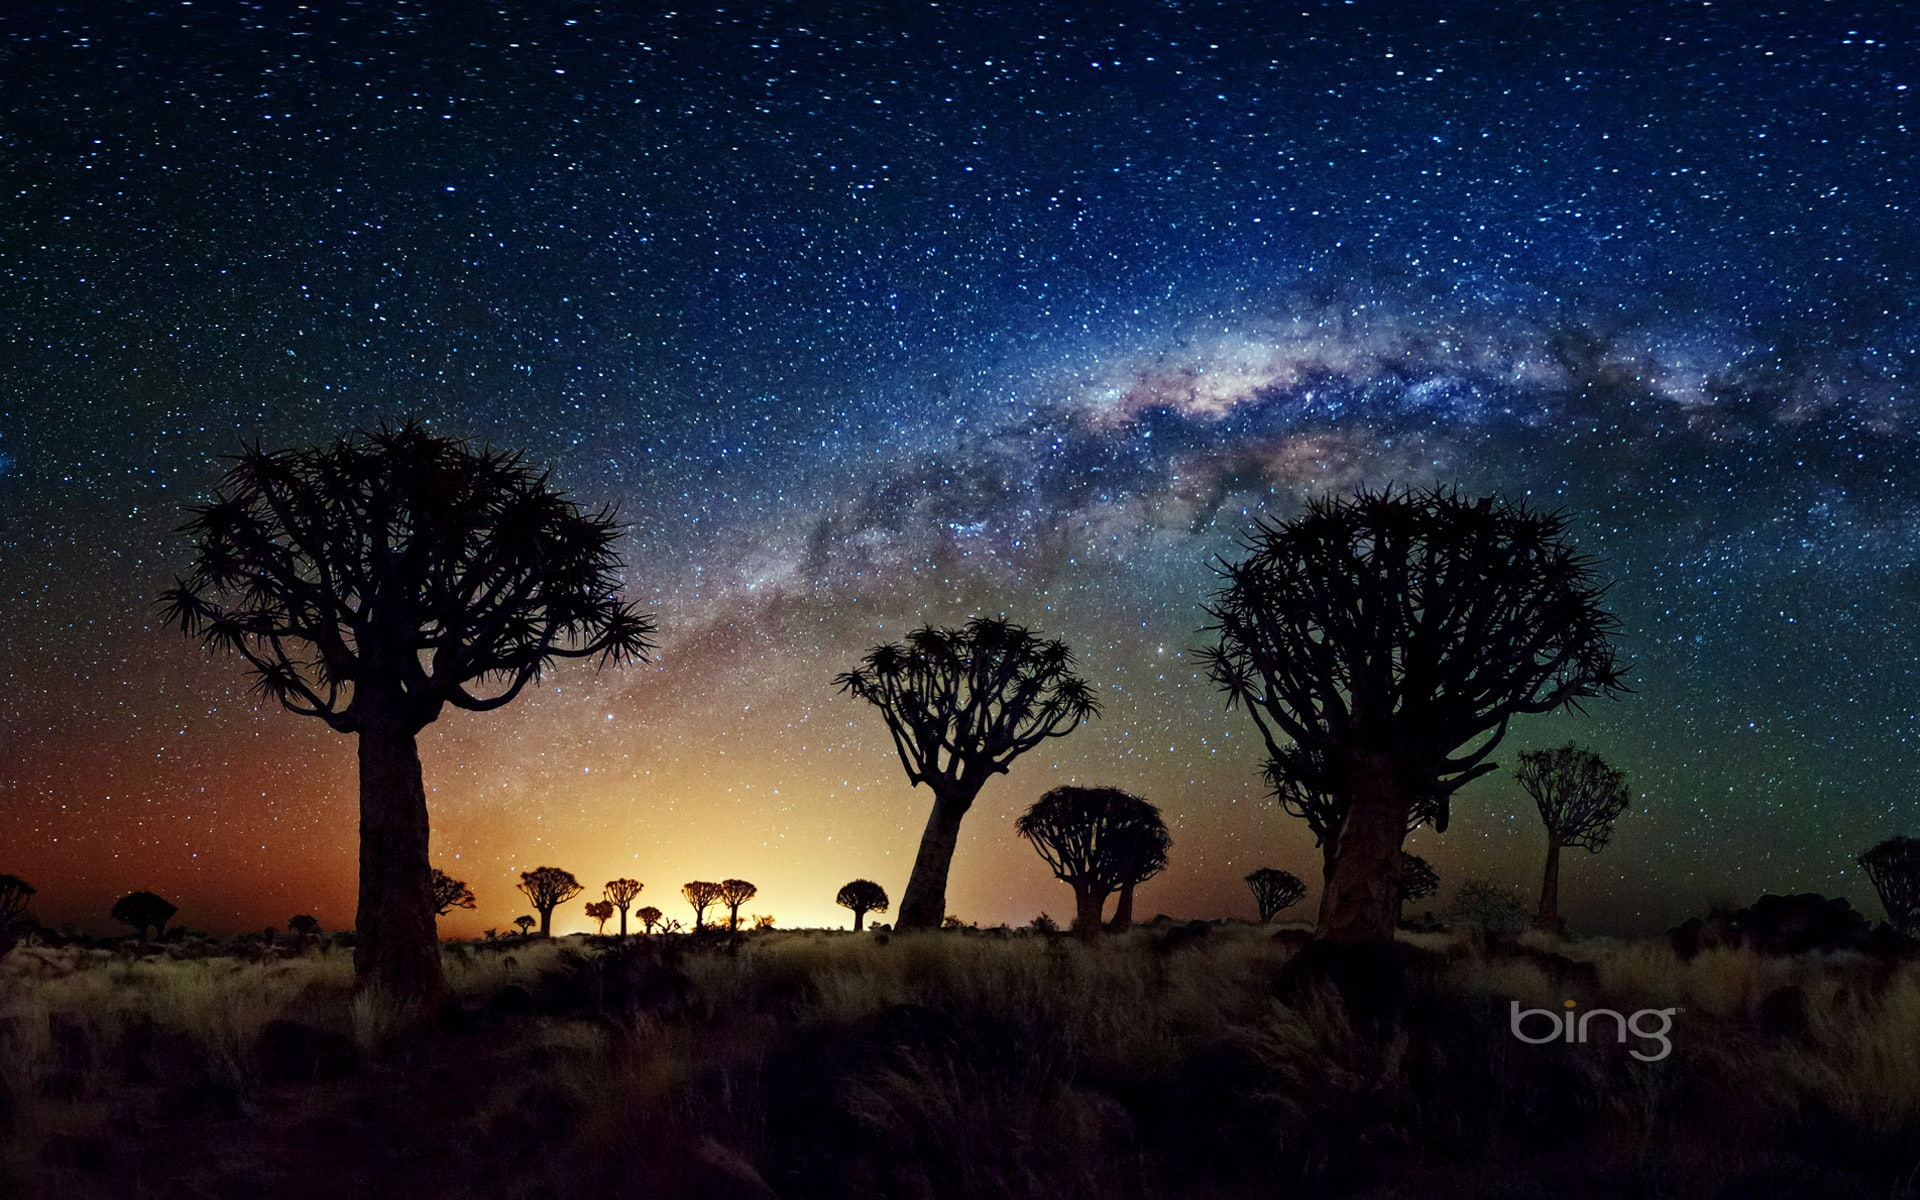 African grasslands night sky-May 2013 Bing wallpap.., silhouette of trees